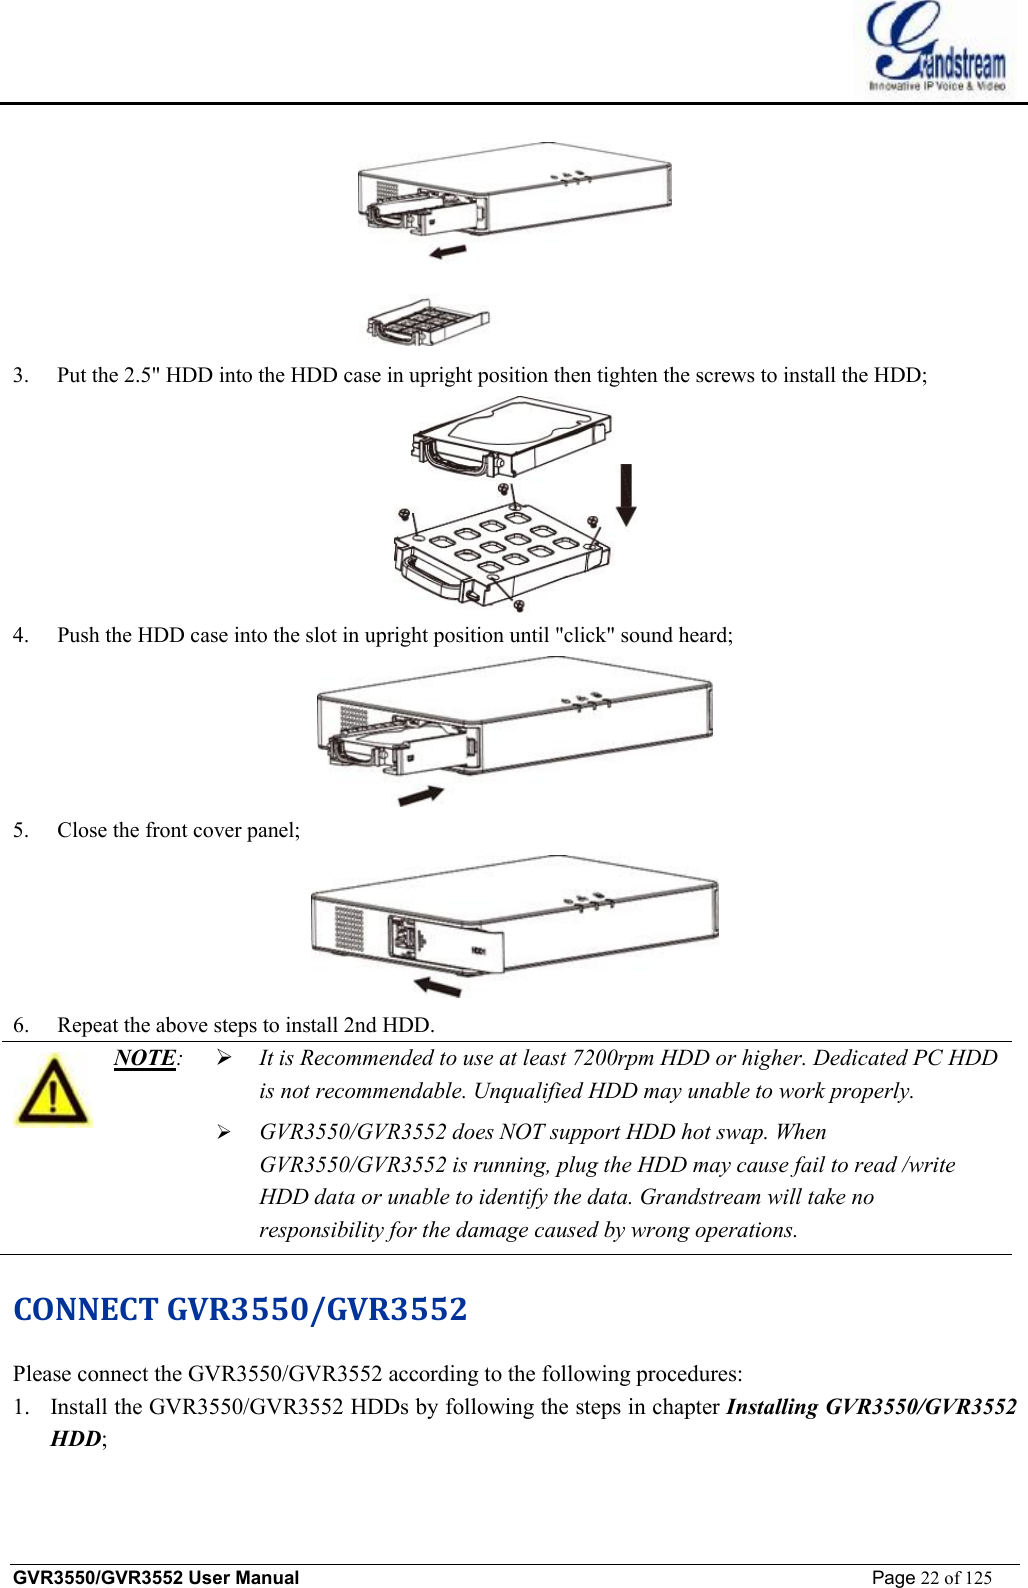    GVR3550/GVR3552 User Manual                                                             Page 22 of 125         3. Put the 2.5&quot; HDD into the HDD case in upright position then tighten the screws to install the HDD;  4. Push the HDD case into the slot in upright position until &quot;click&quot; sound heard;  5. Close the front cover panel;  6. Repeat the above steps to install 2nd HDD.  NOTE:   Ø It is Recommended to use at least 7200rpm HDD or higher. Dedicated PC HDD is not recommendable. Unqualified HDD may unable to work properly. Ø GVR3550/GVR3552 does NOT support HDD hot swap. When GVR3550/GVR3552 is running, plug the HDD may cause fail to read /write HDD data or unable to identify the data. Grandstream will take no responsibility for the damage caused by wrong operations. CONNECT GVR3550/GVR3552 Please connect the GVR3550/GVR3552 according to the following procedures: 1. Install the GVR3550/GVR3552 HDDs by following the steps in chapter Installing GVR3550/GVR3552 HDD; 